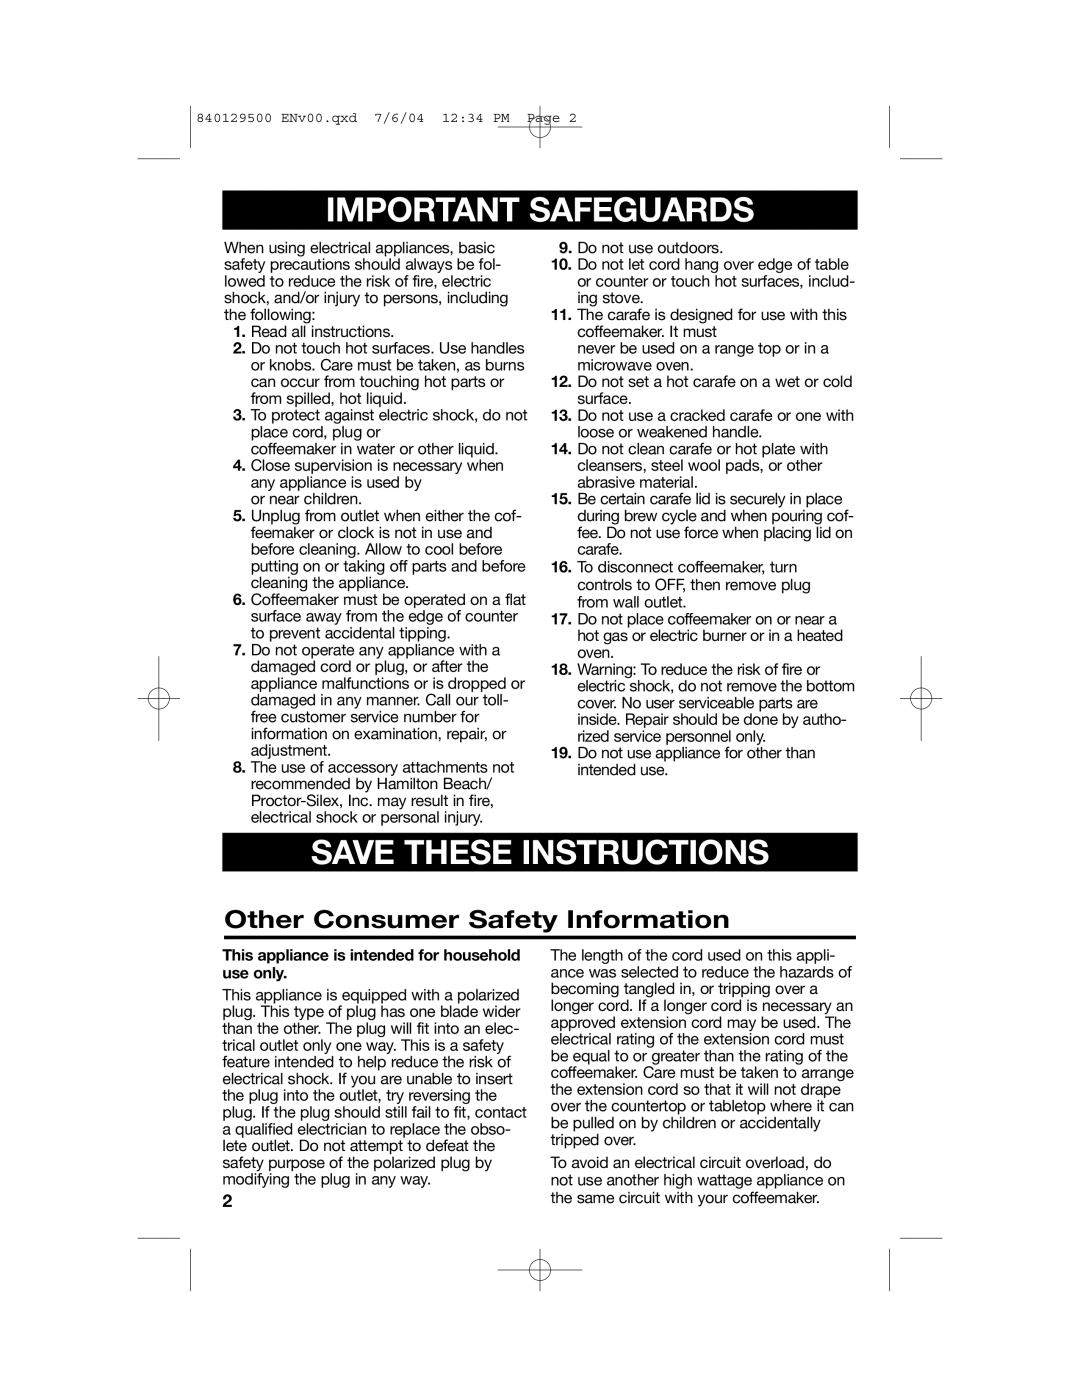 Hamilton Beach 43254, 43224C, 43251 manual Important Safeguards, Save These Instructions, Other Consumer Safety Information 